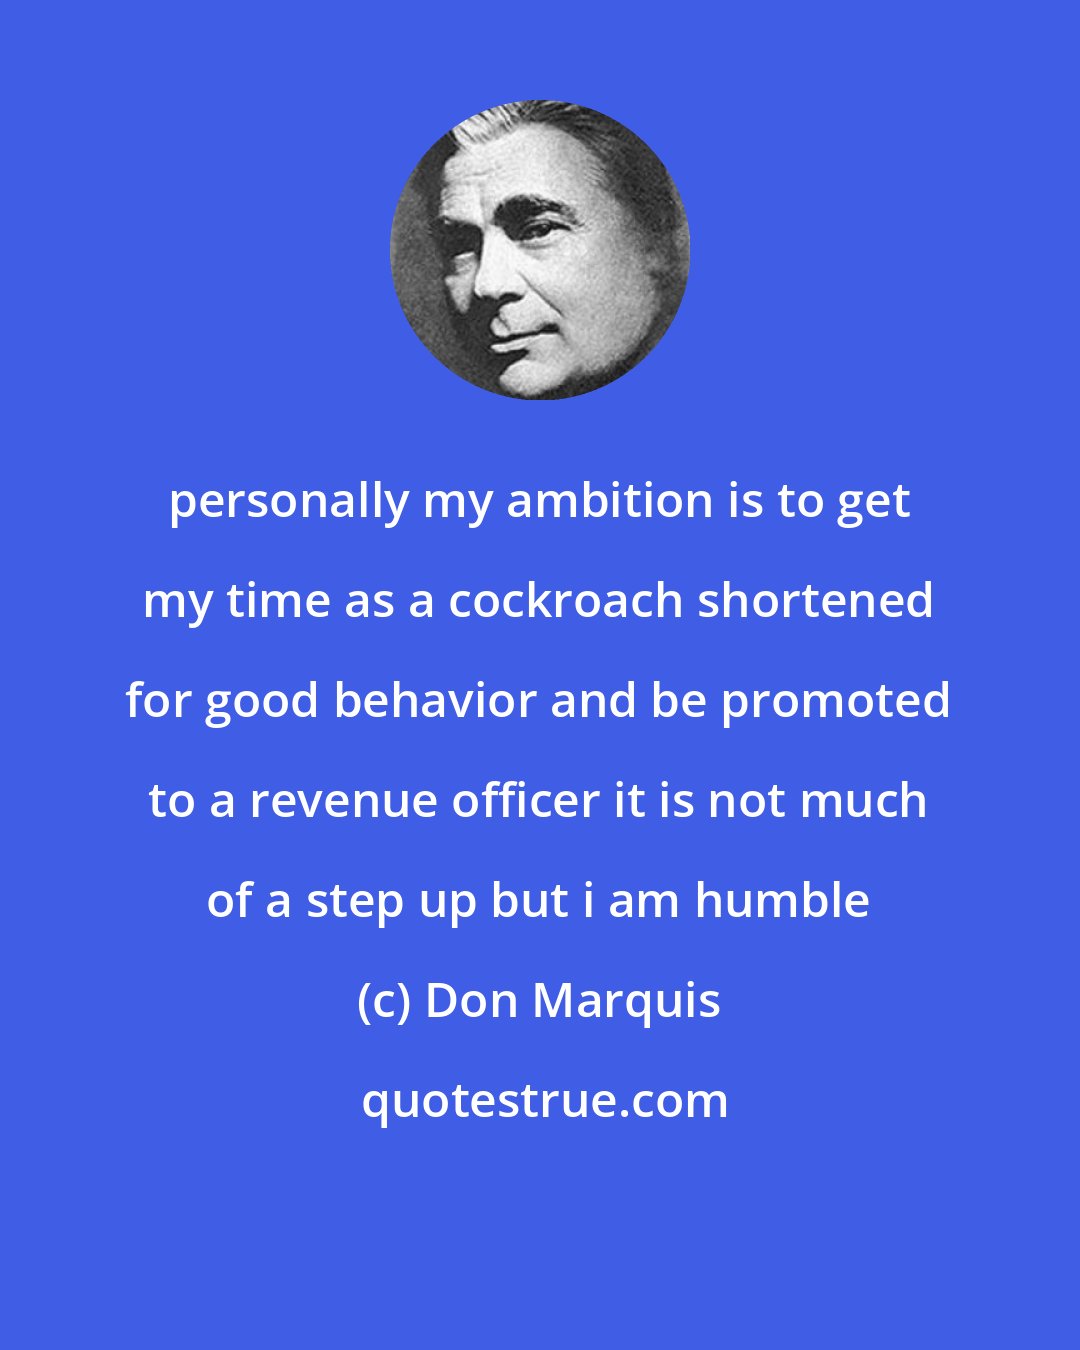 Don Marquis: personally my ambition is to get my time as a cockroach shortened for good behavior and be promoted to a revenue officer it is not much of a step up but i am humble